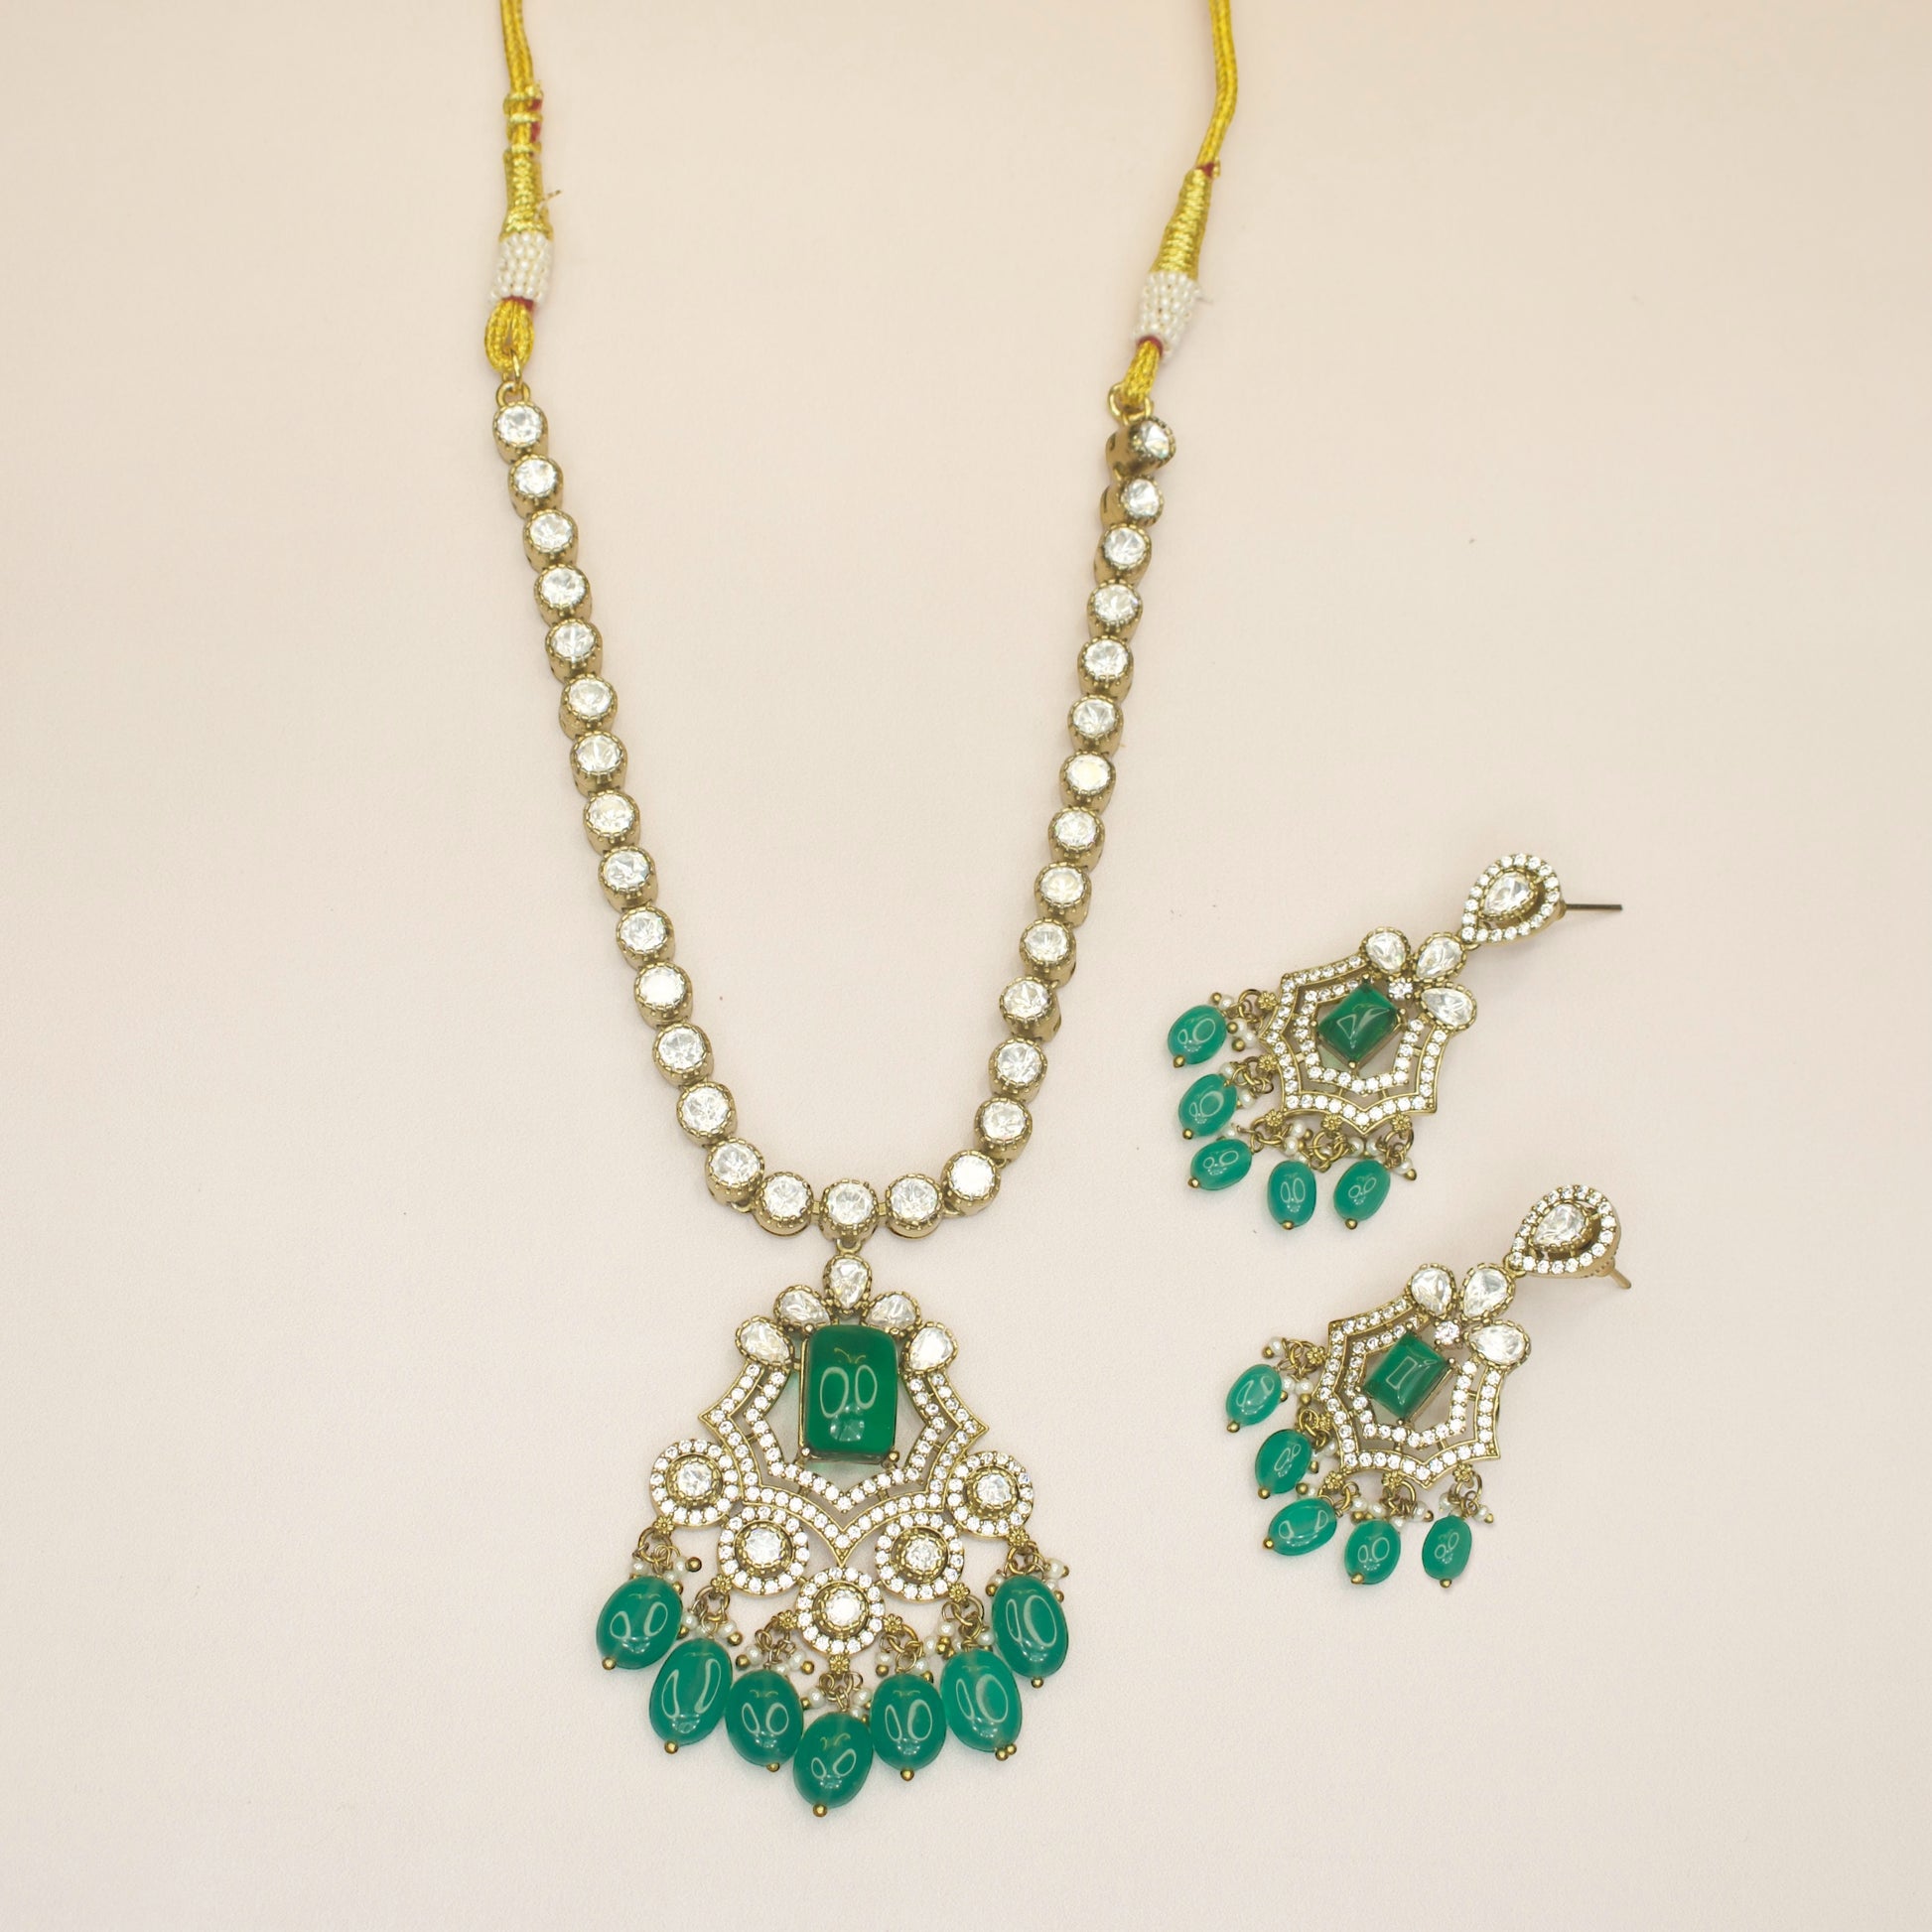 Beautiful Victorian Necklace with pendant & earrings. This Victorian Jewellery is available in a Green colour variant. 